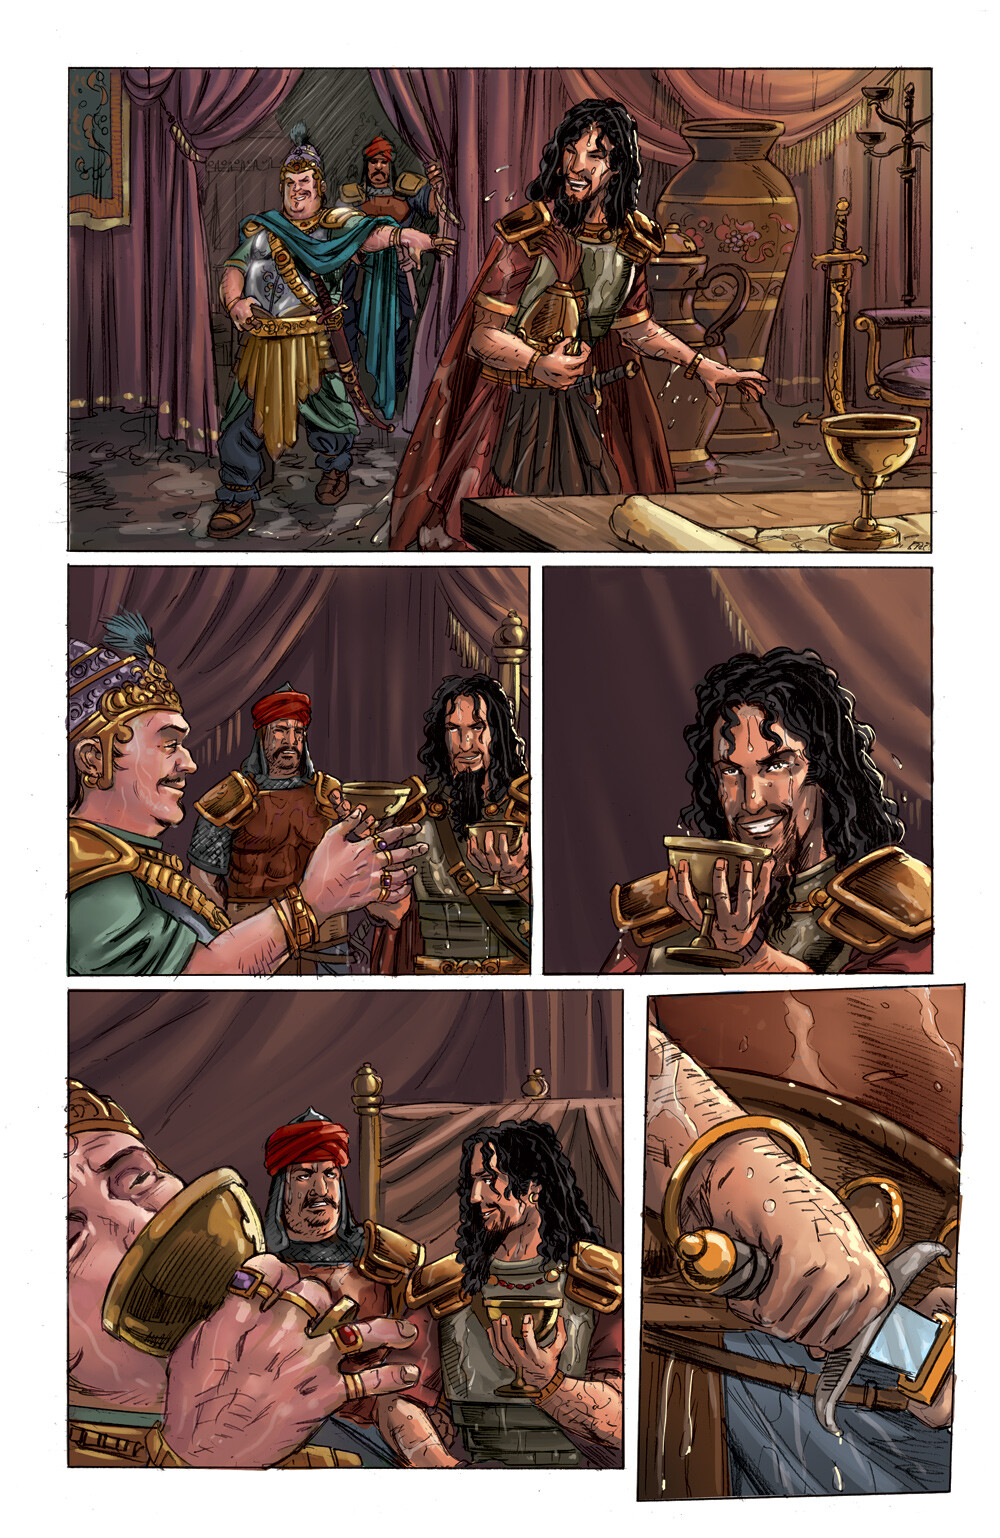 Scions of the Cursed King #2
Page 4, color by Vivek Goel